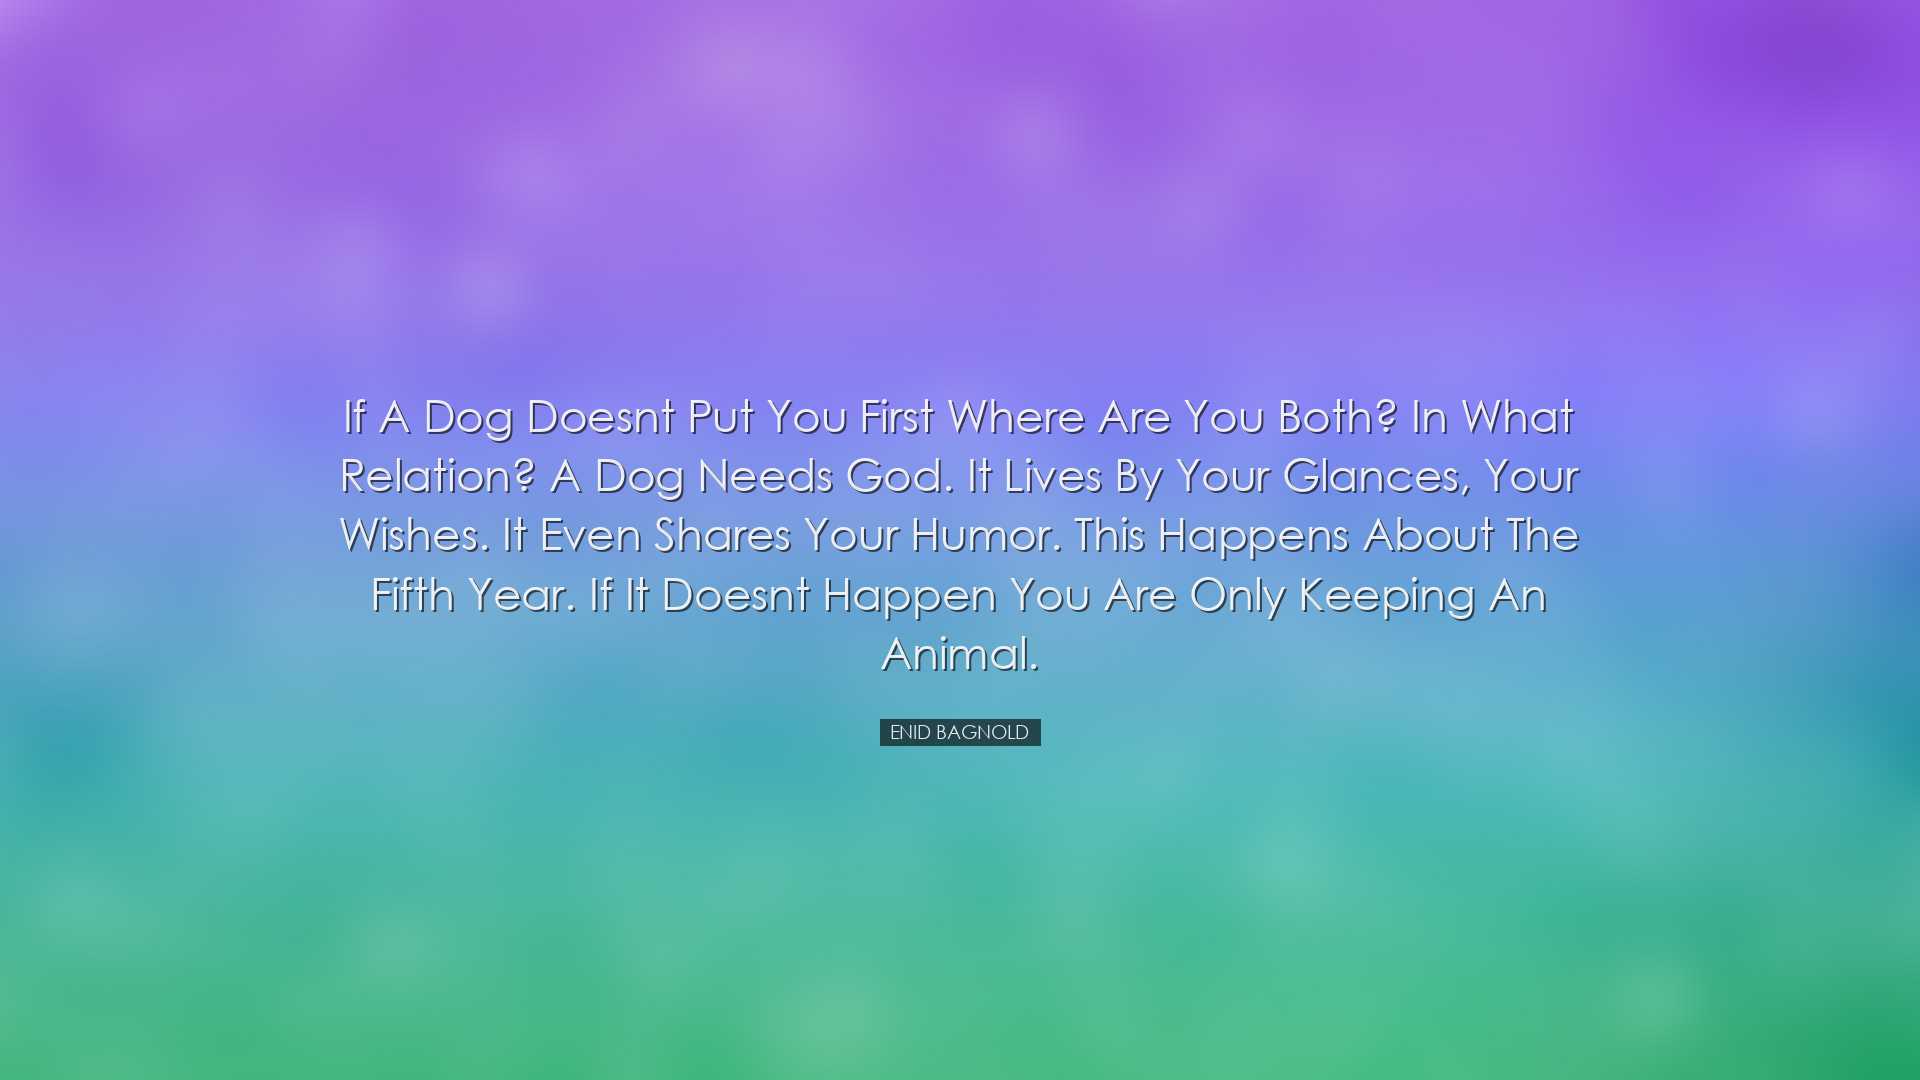 If a dog doesnt put you first where are you both? In what relation